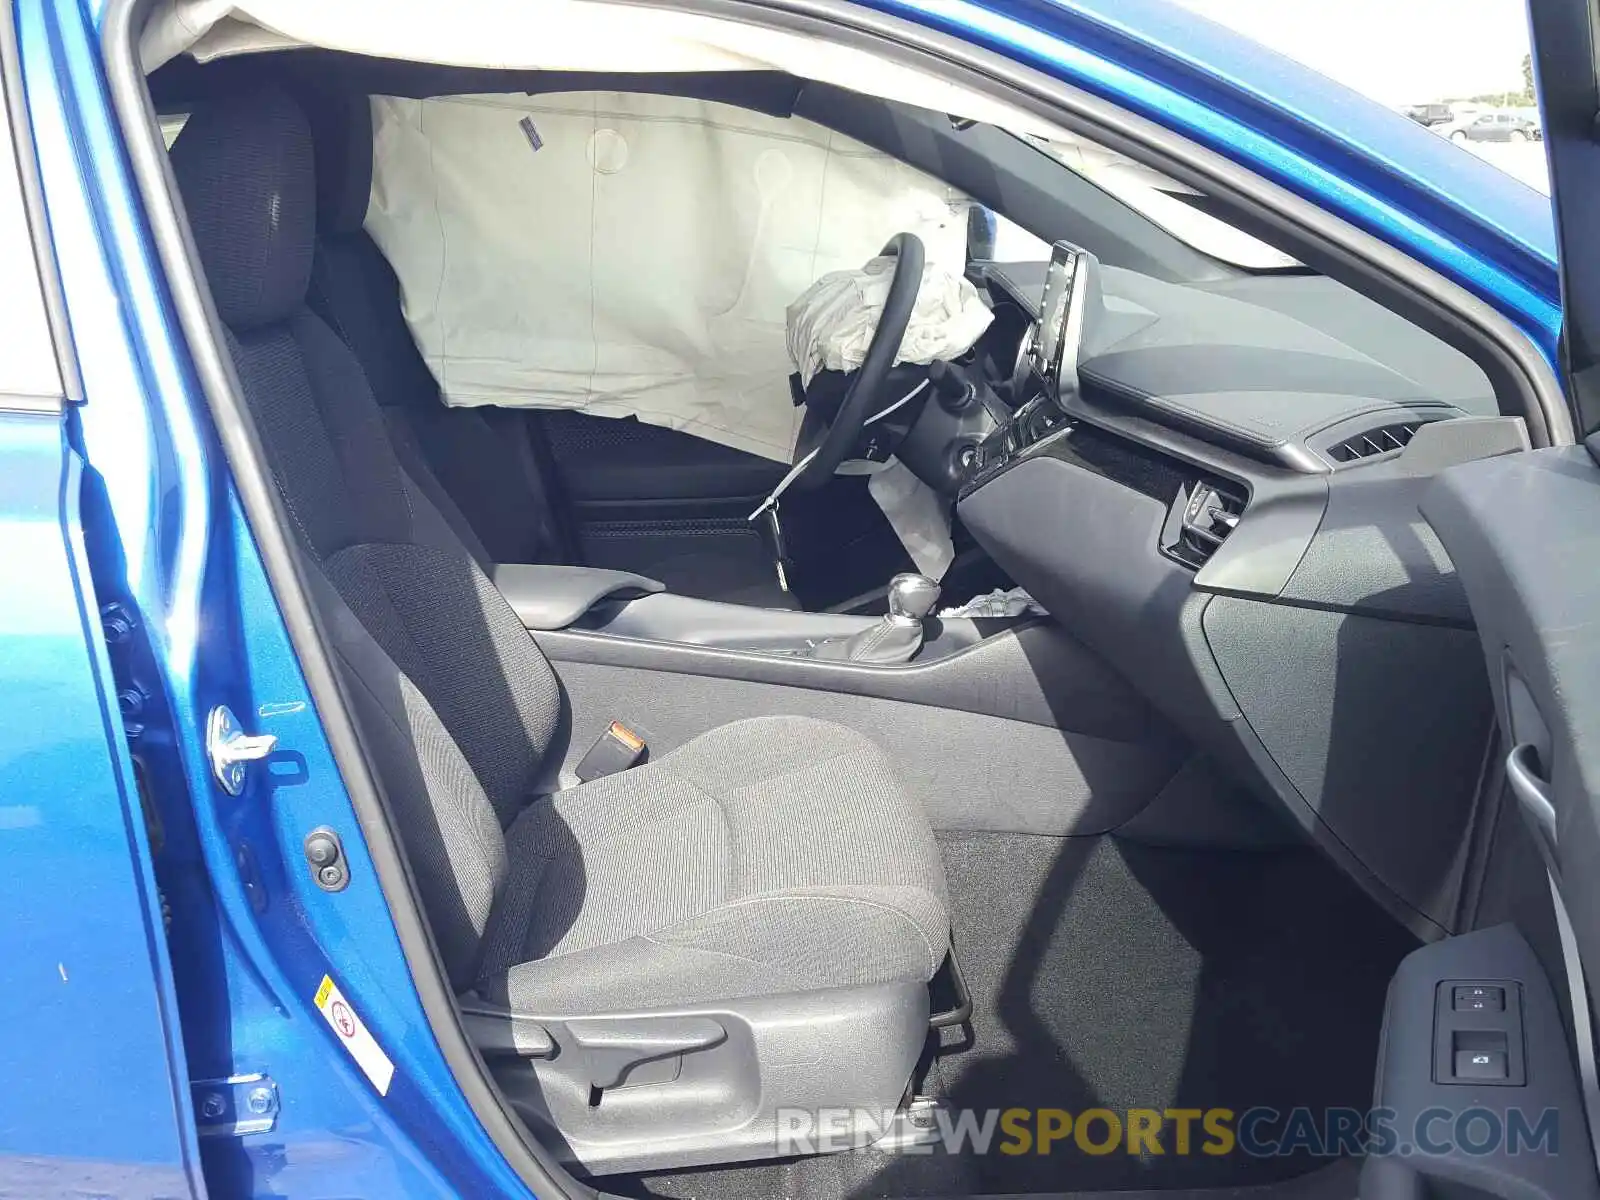 5 Photograph of a damaged car NMTKHMBXXKR099881 TOYOTA C-HR 2019